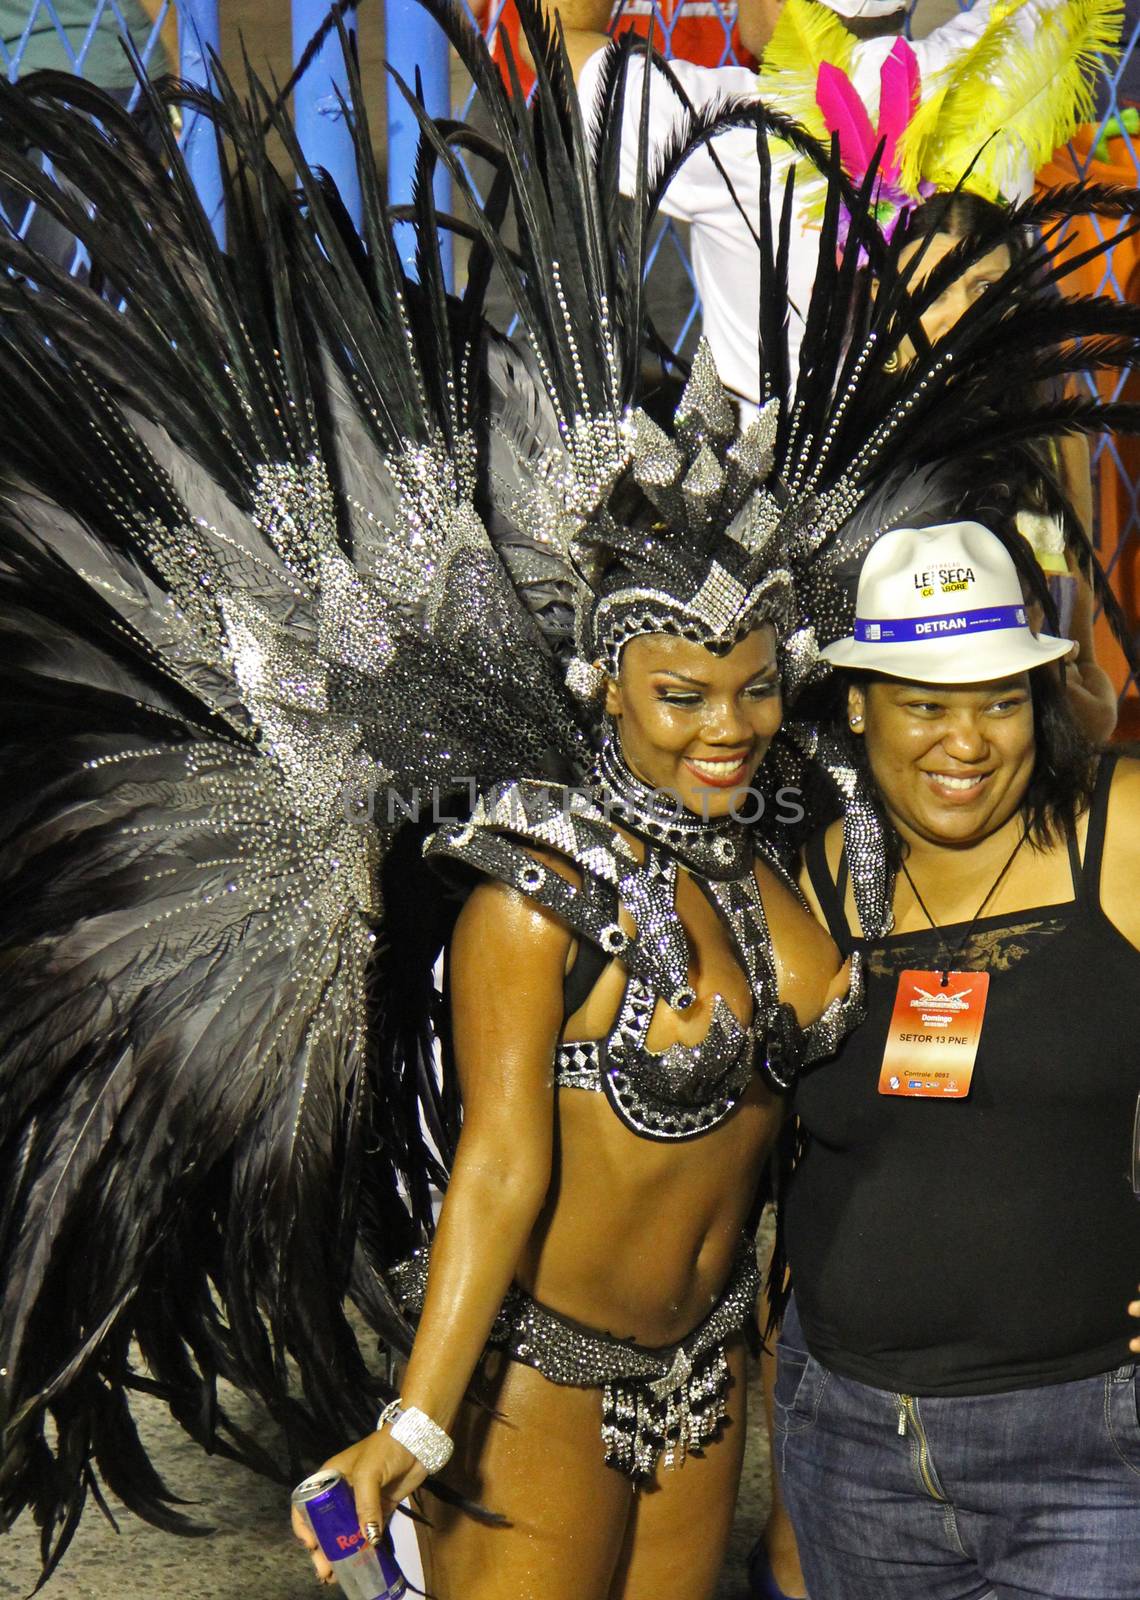 A spectator and an entertainer posing for their photo at a carnaval in Rio de Janeiro, Brazil
03 Mar 2014
No model release
Editorial only